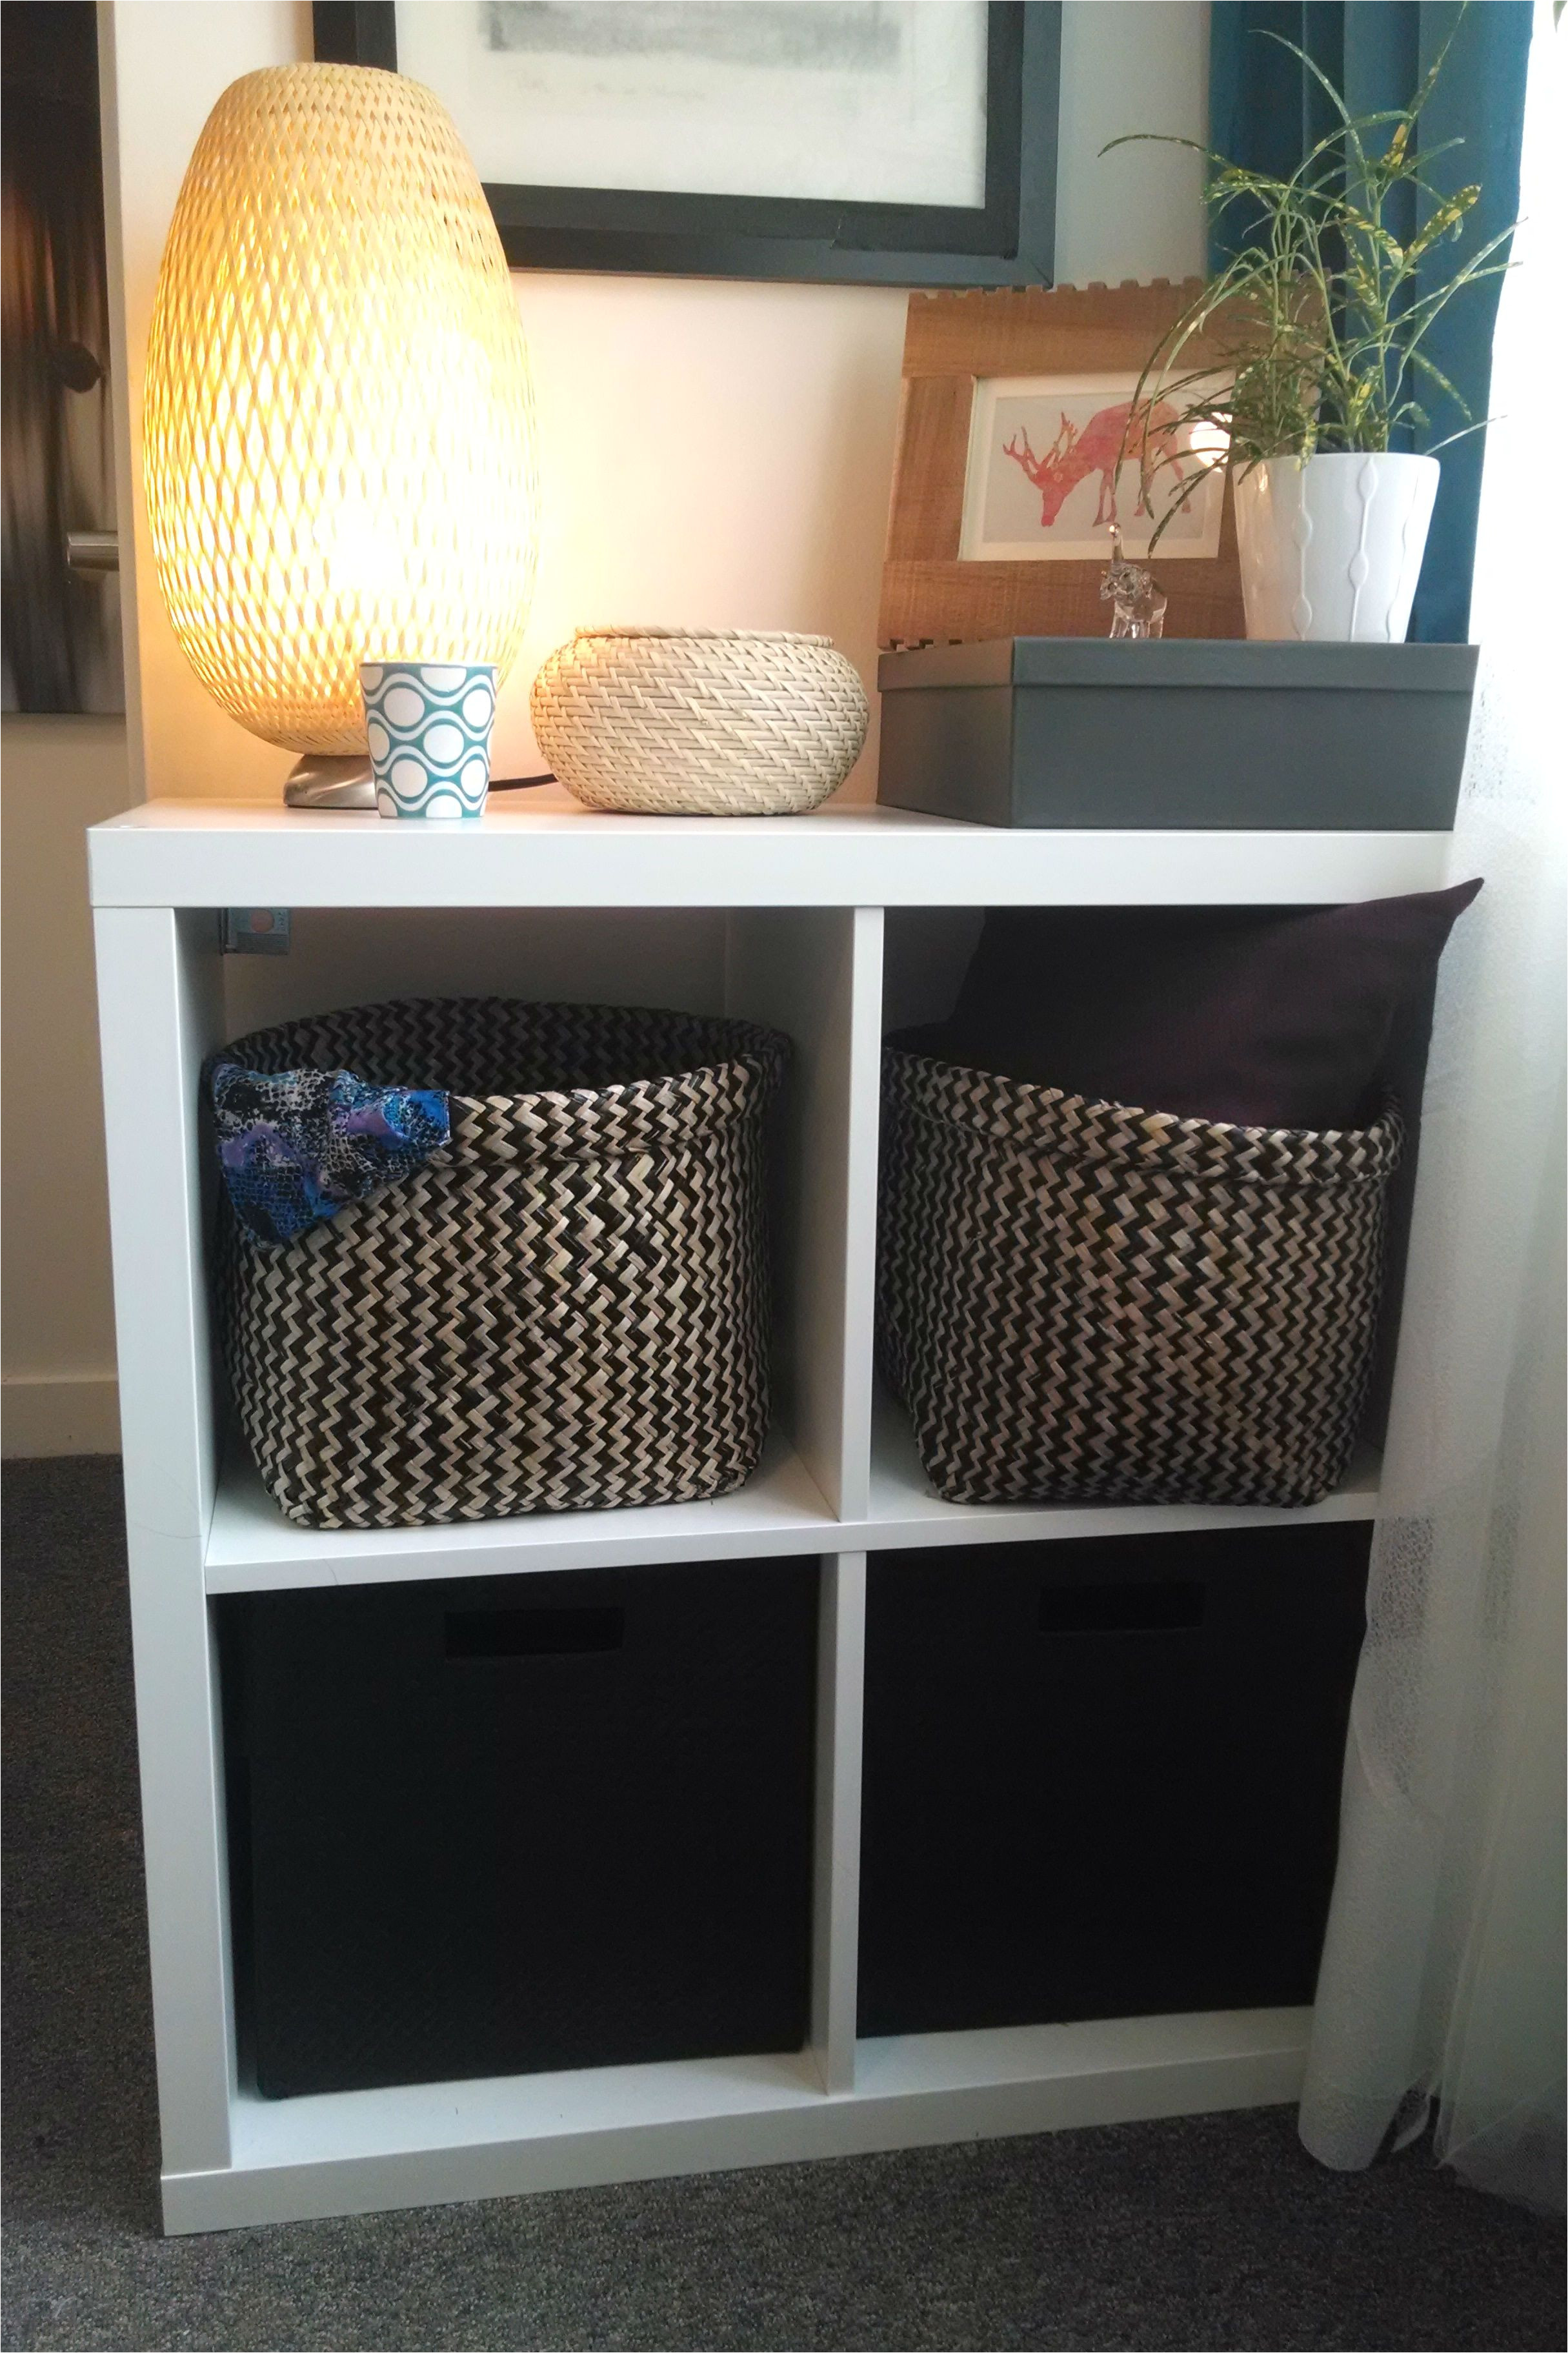 the kallax shelving unit plus some great textured baskets adds storage and pattern to this small space